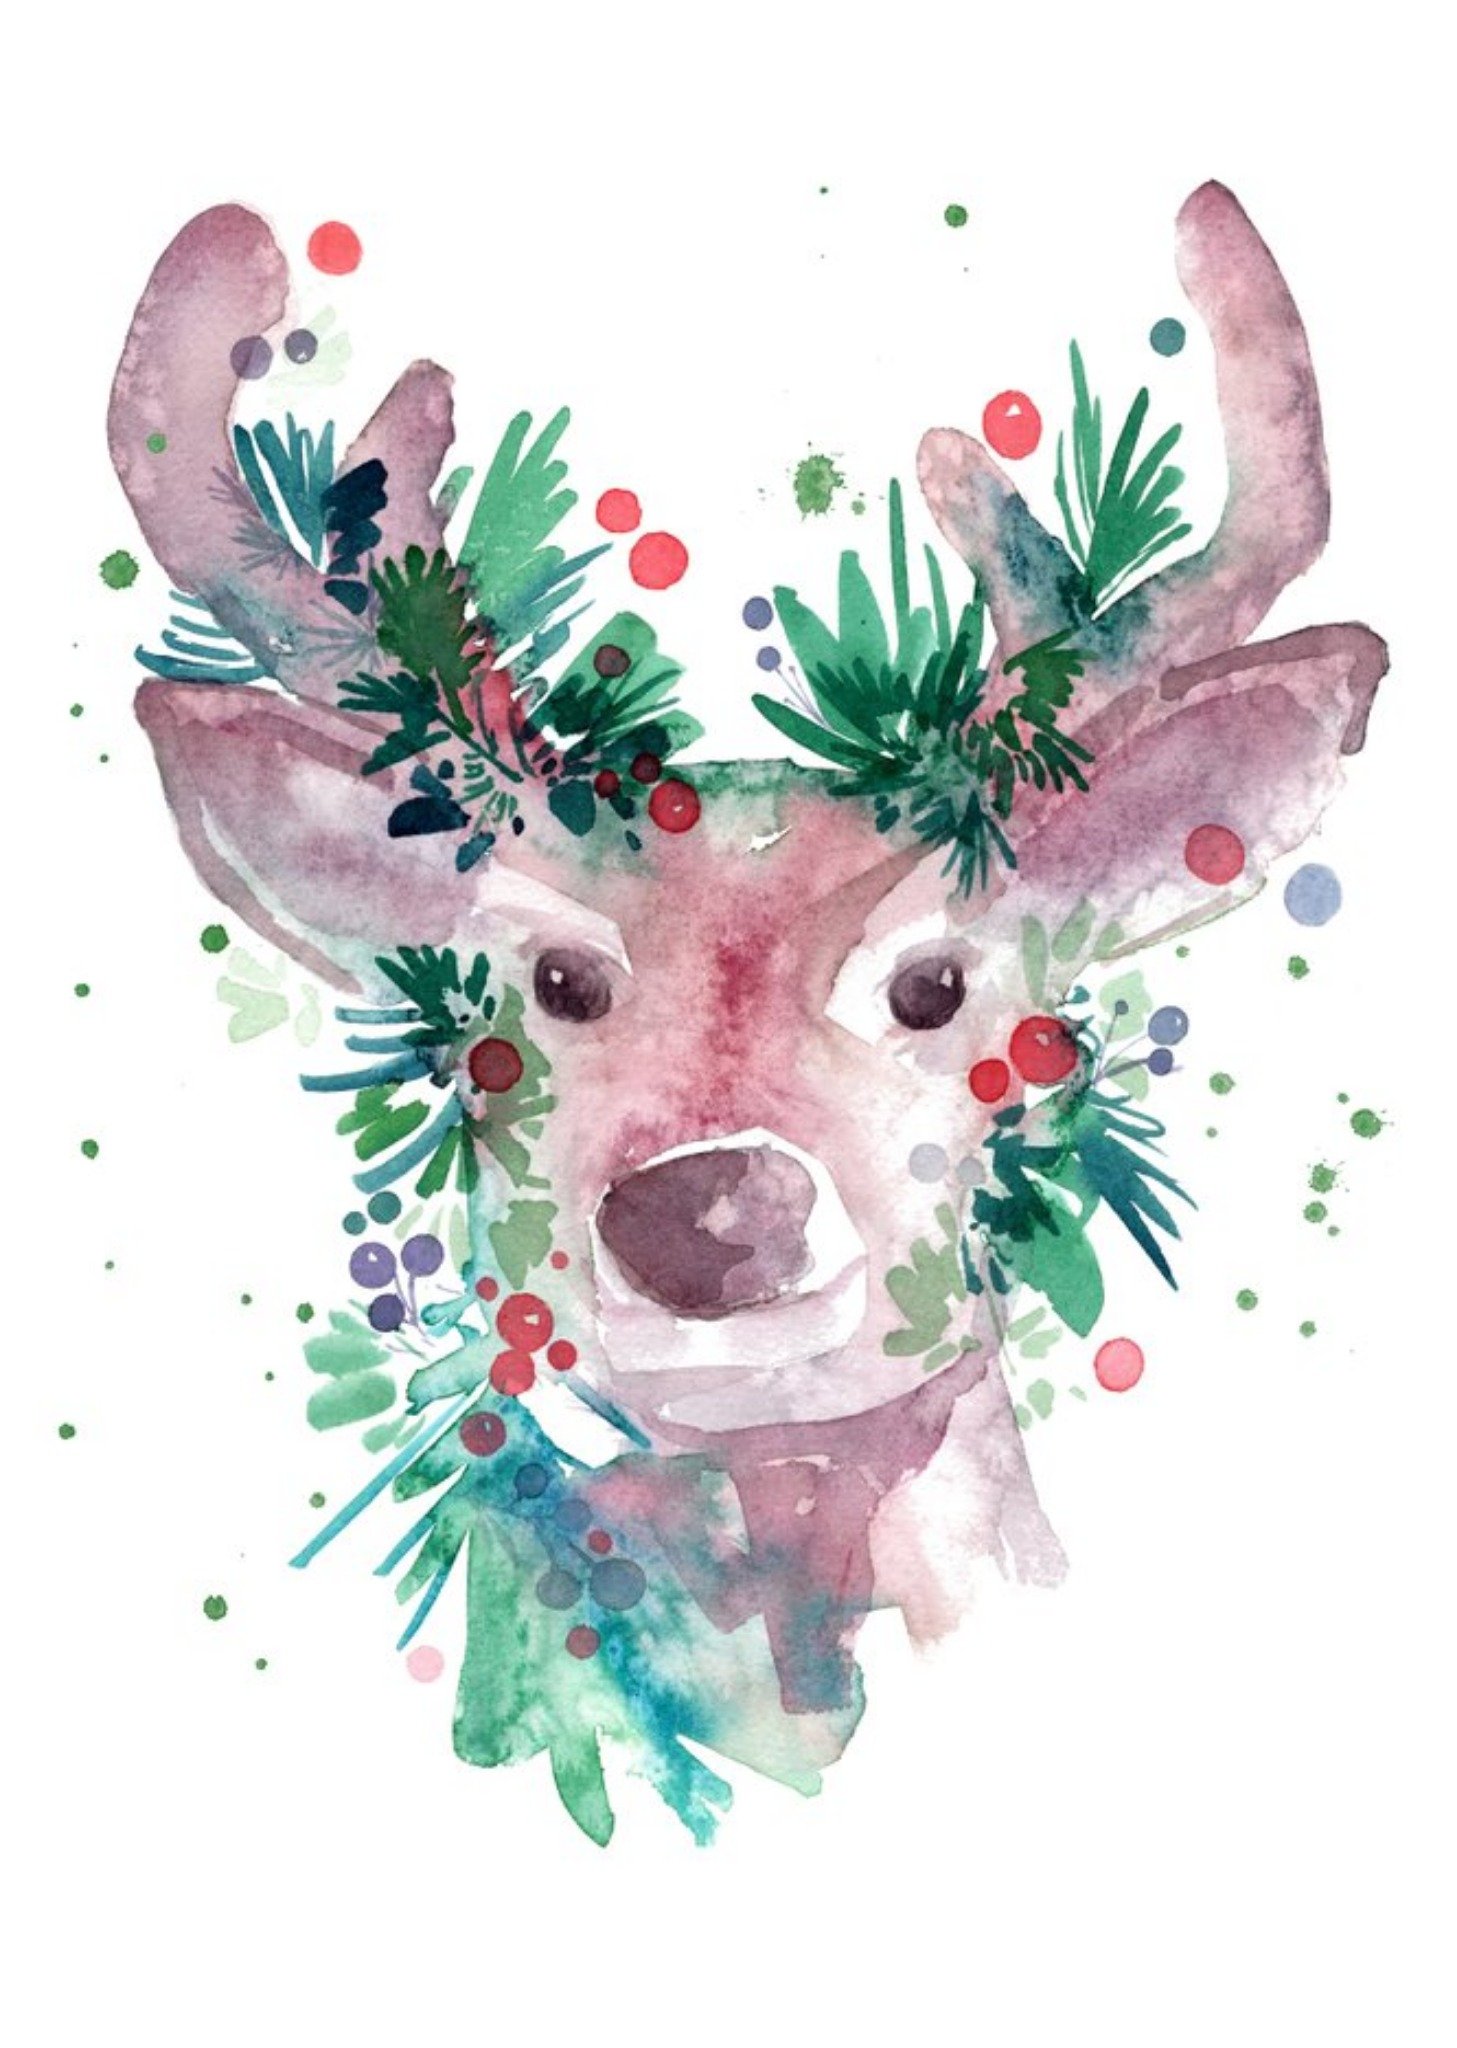 Moonpig Beautiful Reindeer With Holly Watercolour Illustration Christmas Card Ecard